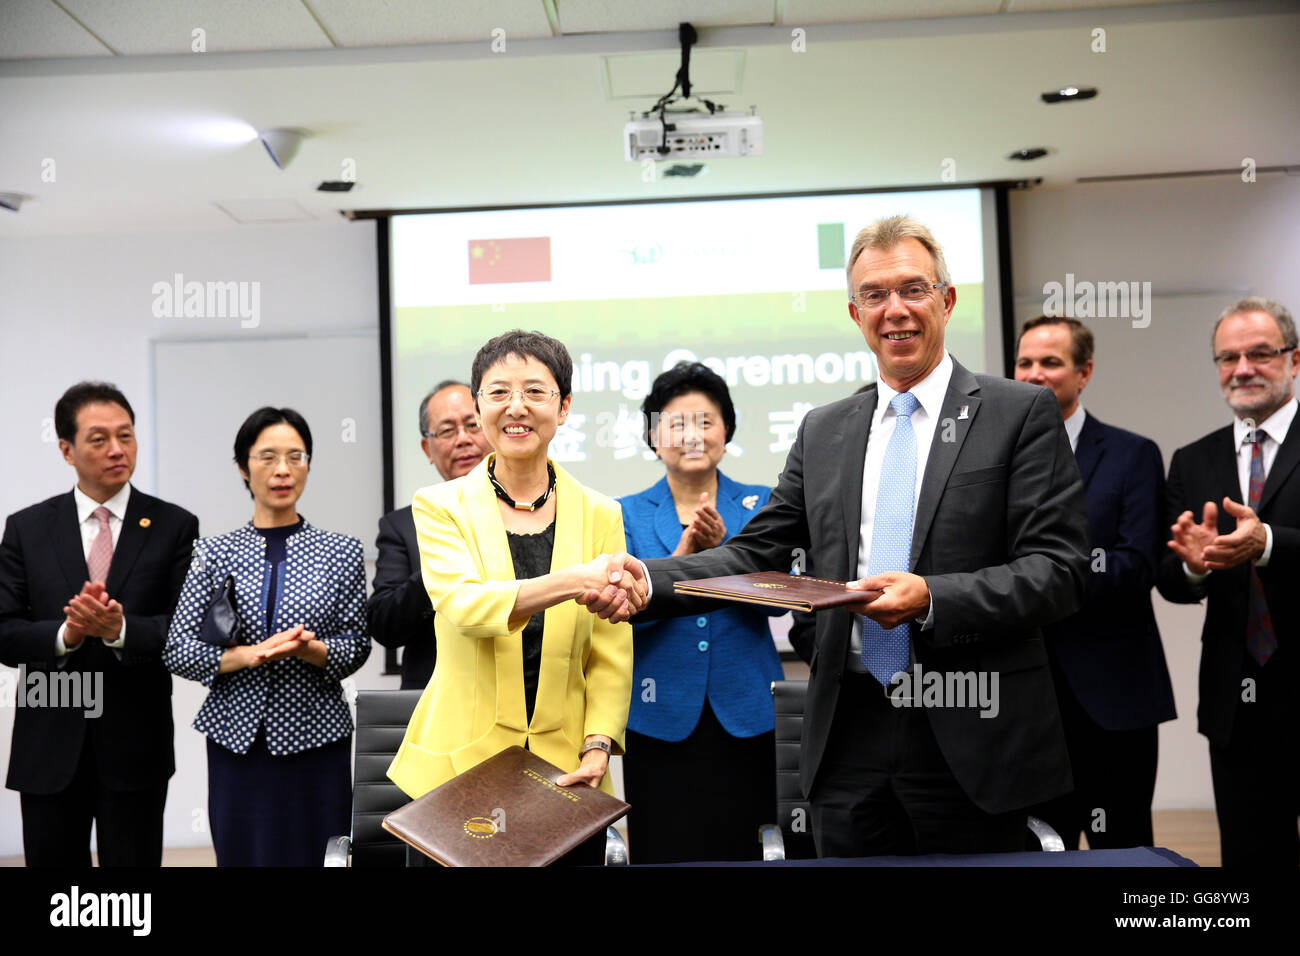 Mexico City, Mexico. 9th Aug, 2016. Chinese Vice Premier Liu Yandong (C, Rear) witnesses the signing of a memorandum of understanding between the China Scholarship Council and the International Maize and Wheat Improvement Center (CIMMYT) on renewing their cooperation during her visit at CIMMYT based in Texcoco, Mexico, on Aug. 9, 2016. Credit:  David de la Paz/Xinhua/Alamy Live News Stock Photo